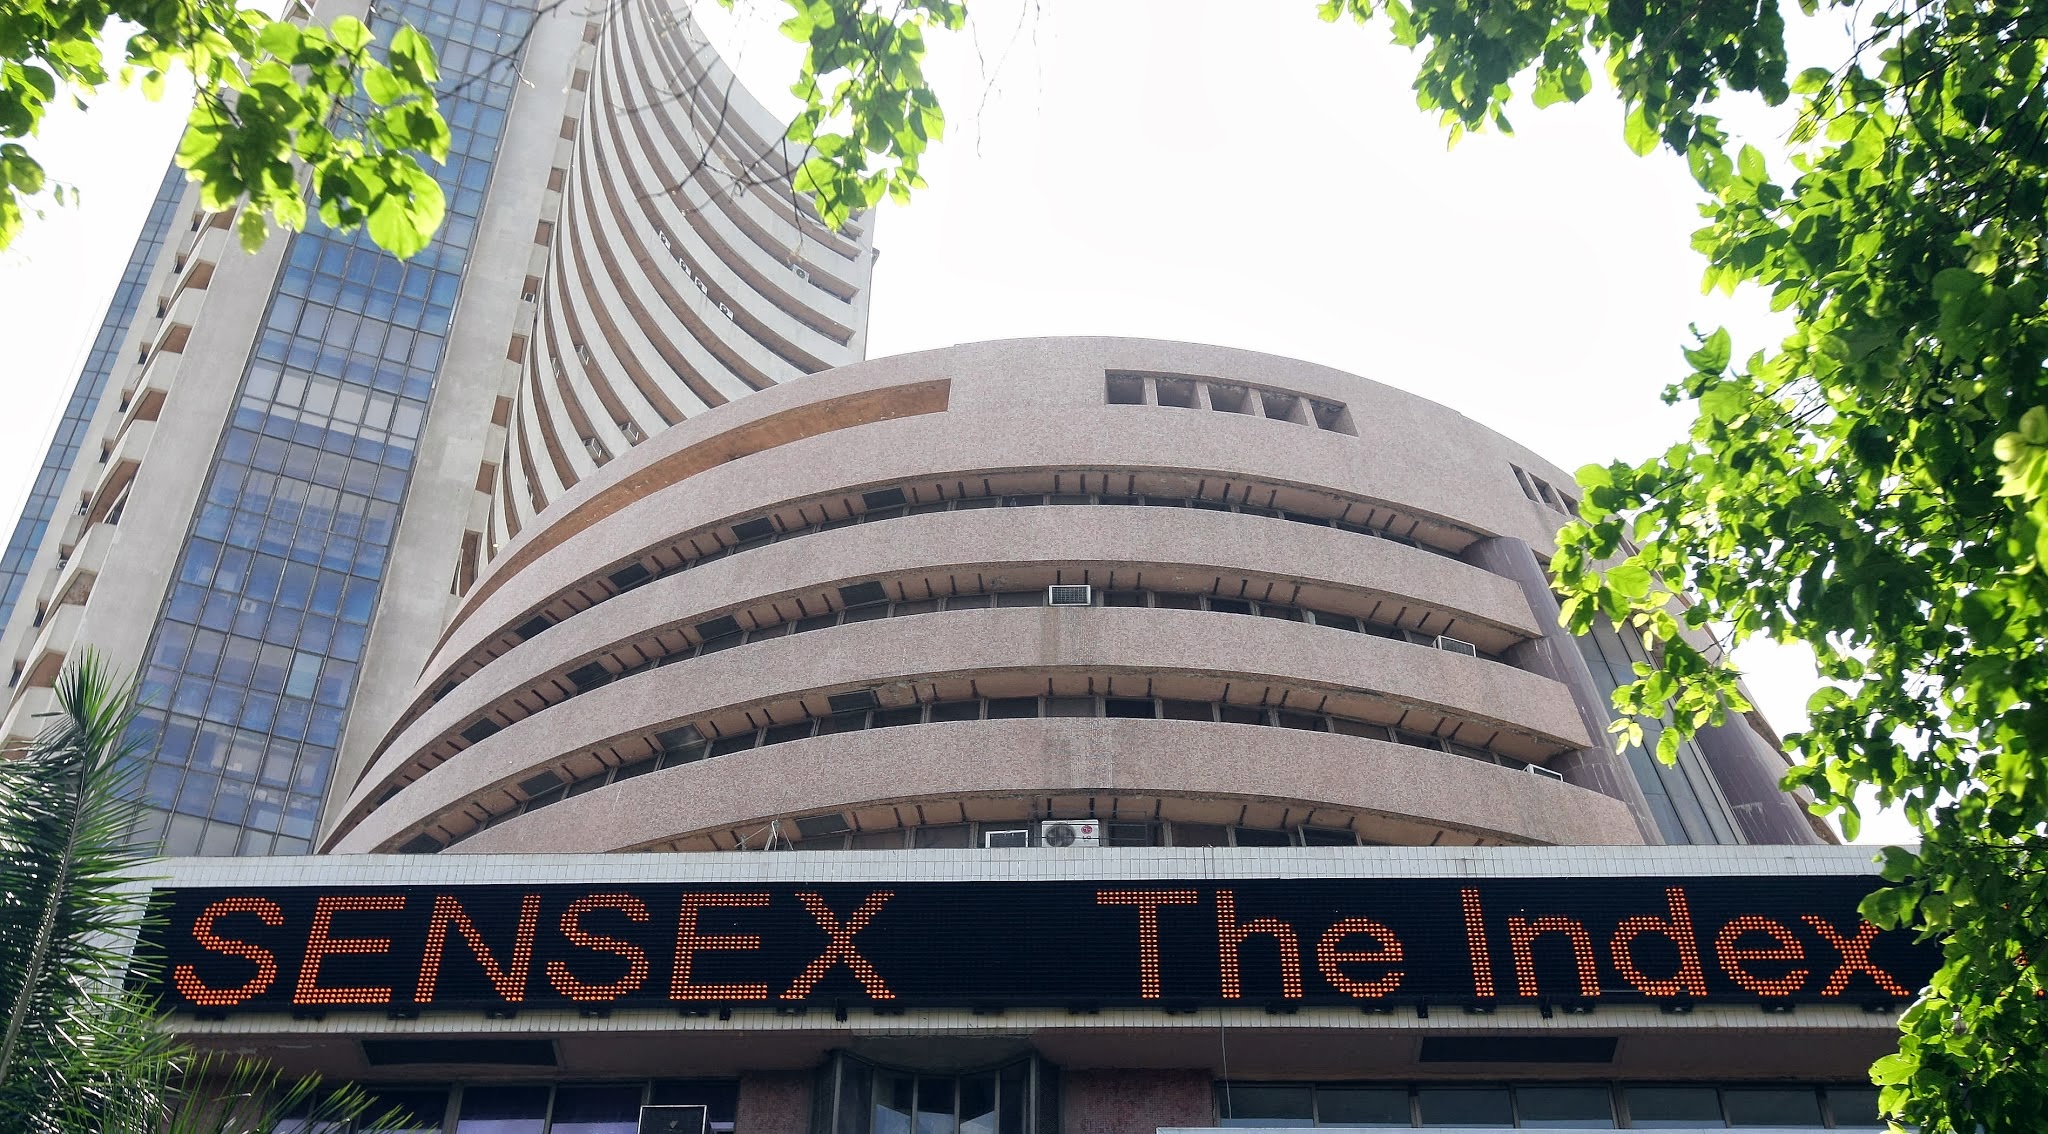 sensex open with 106 point gain sensex 111 point gain sensex closed 260 point stock market begins with gain sensex begins with gain sensex 56 point